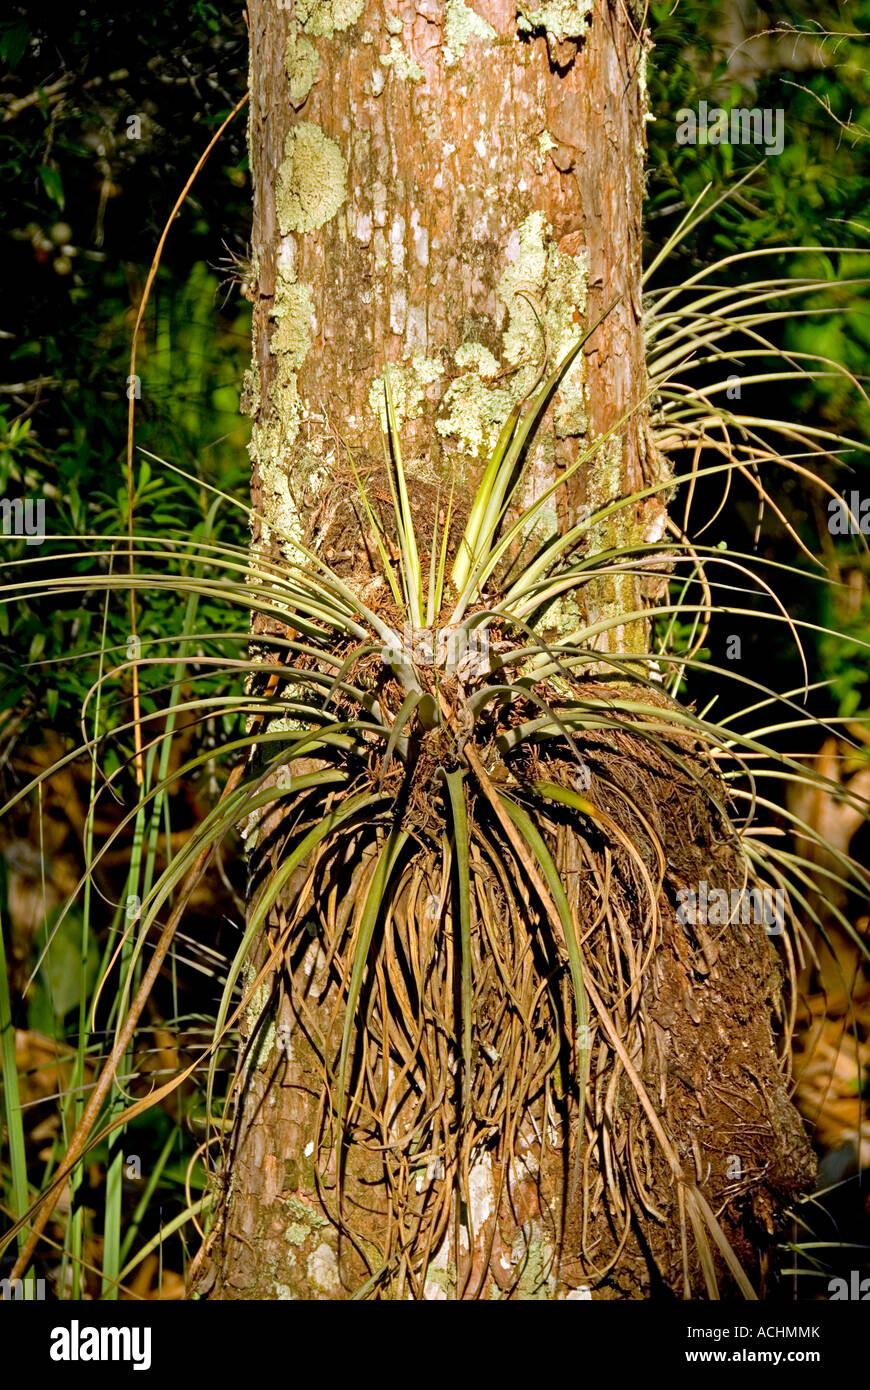 Air plant attached to tree Florida epiphyte Stock Photo